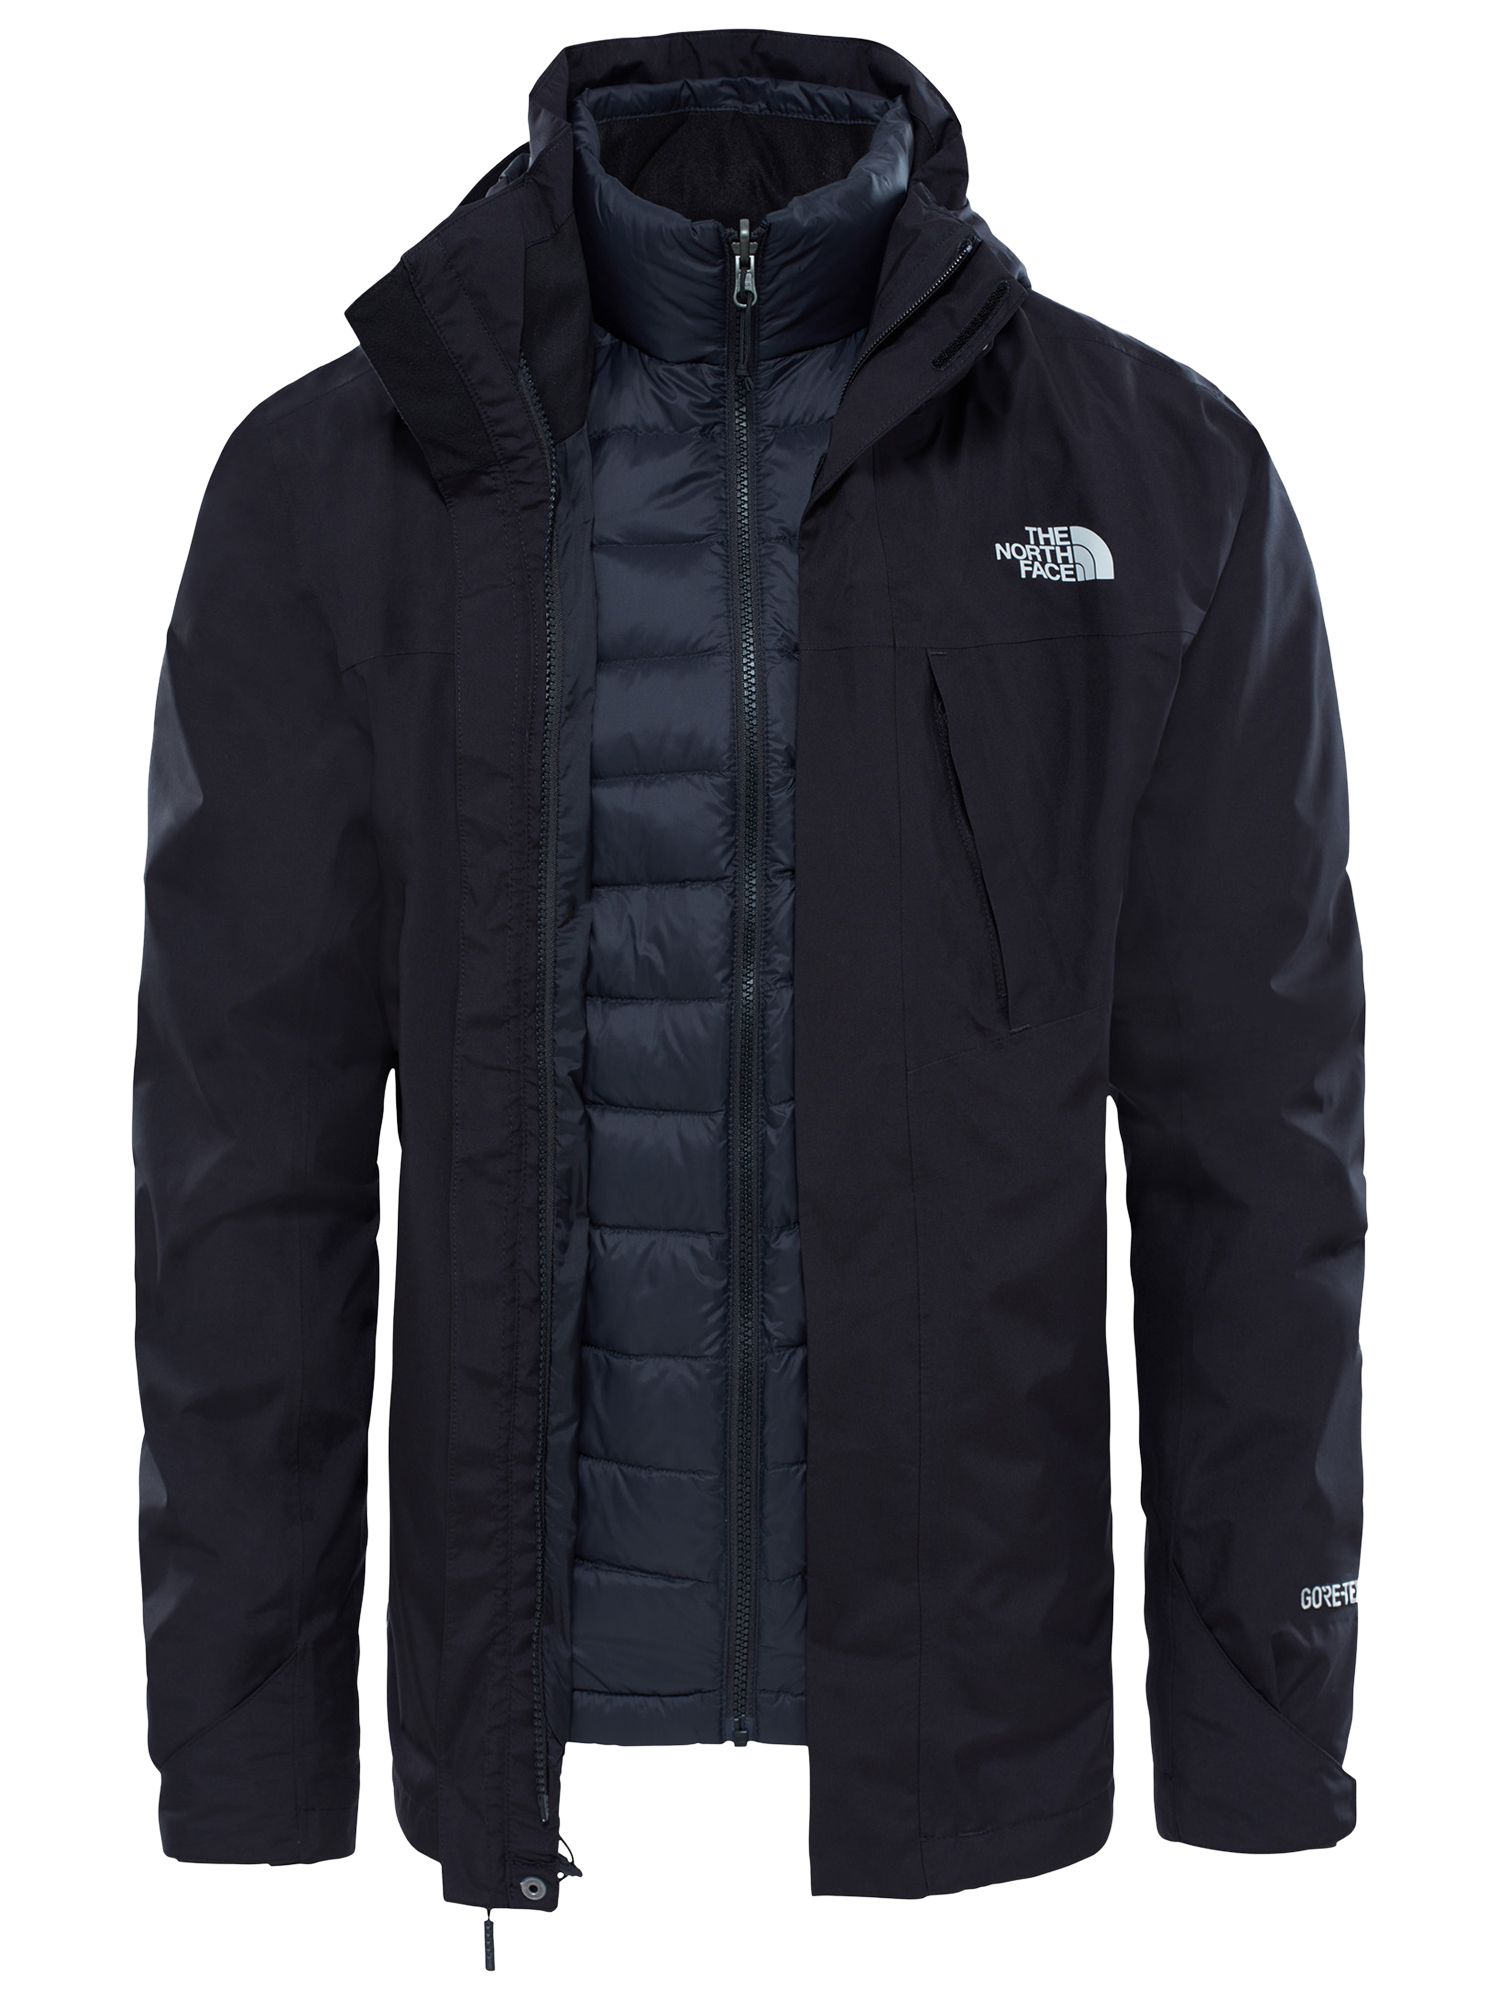 The North Face Mountain Triclimate Men's Jacket, Black